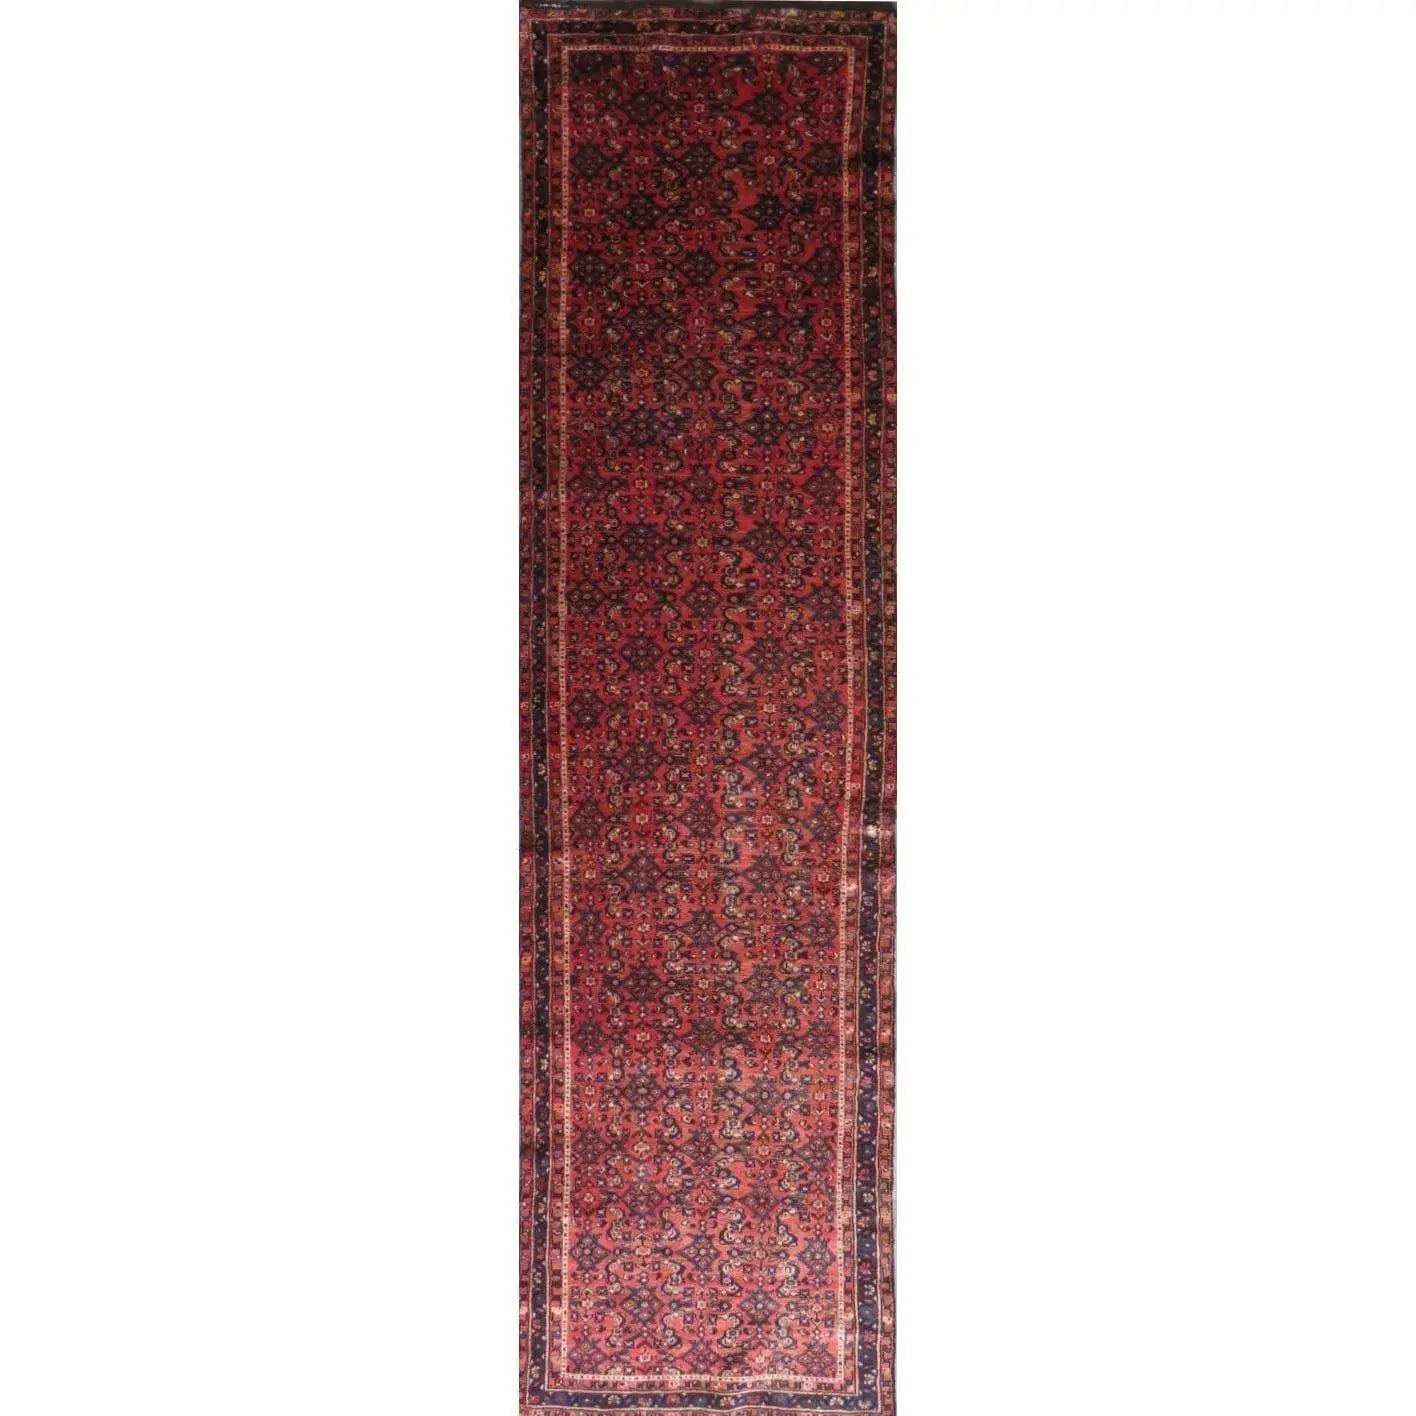 Hand-Knotted Persian Wool Rug _ Luxurious Vintage Design, 12'9" x 3'3", Artisan Crafted